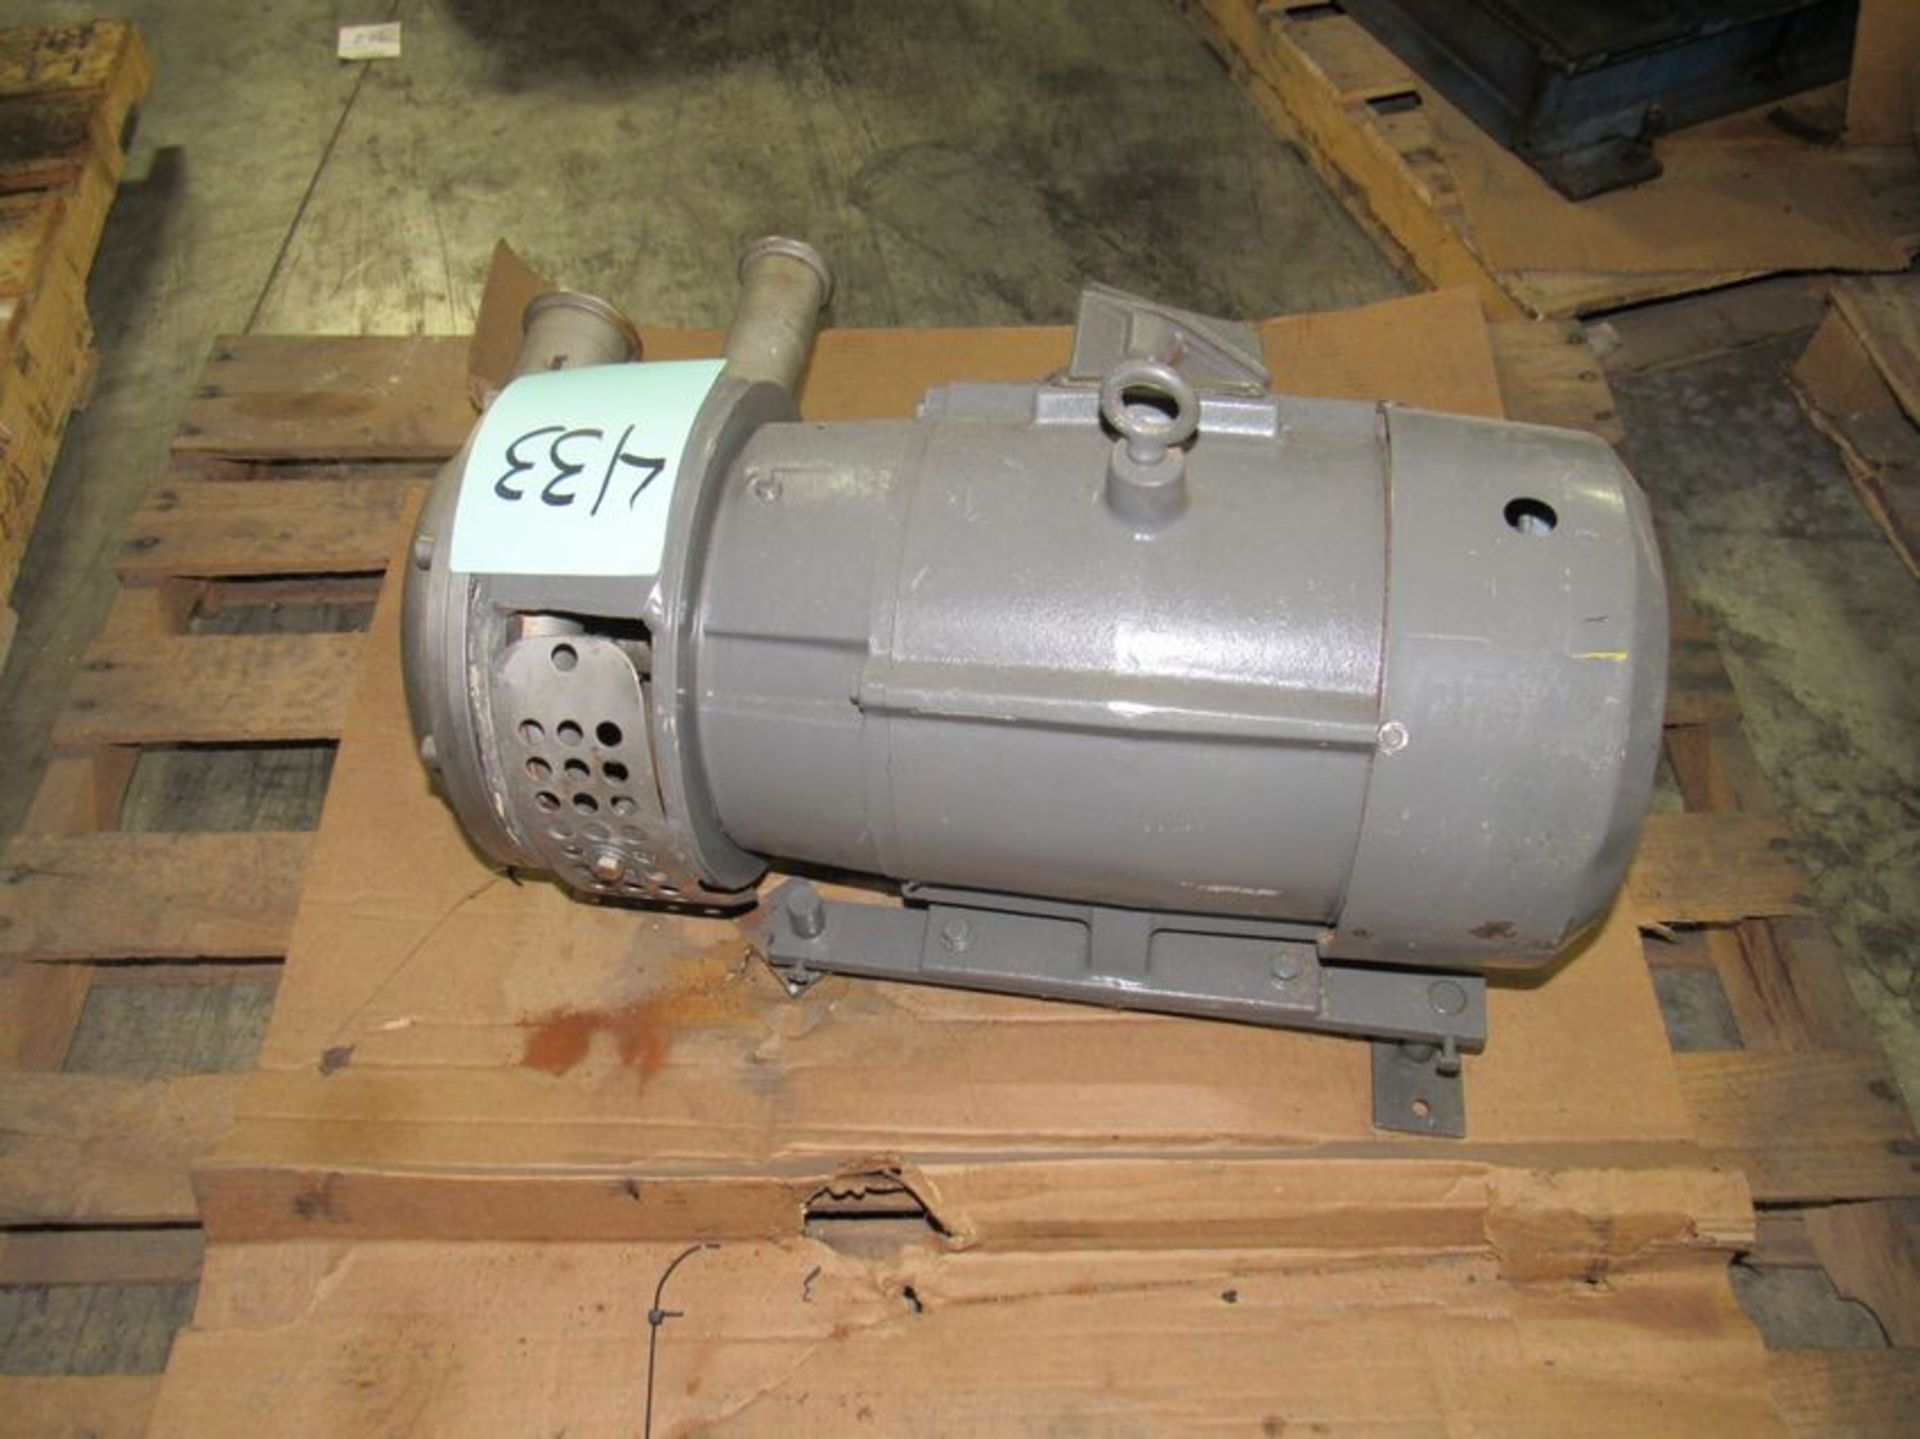 Stainless Steel high volume dynamic pump with parallel inlet/outlet 2.5"inlet and 1.75" outlet; 10HP - Image 6 of 7